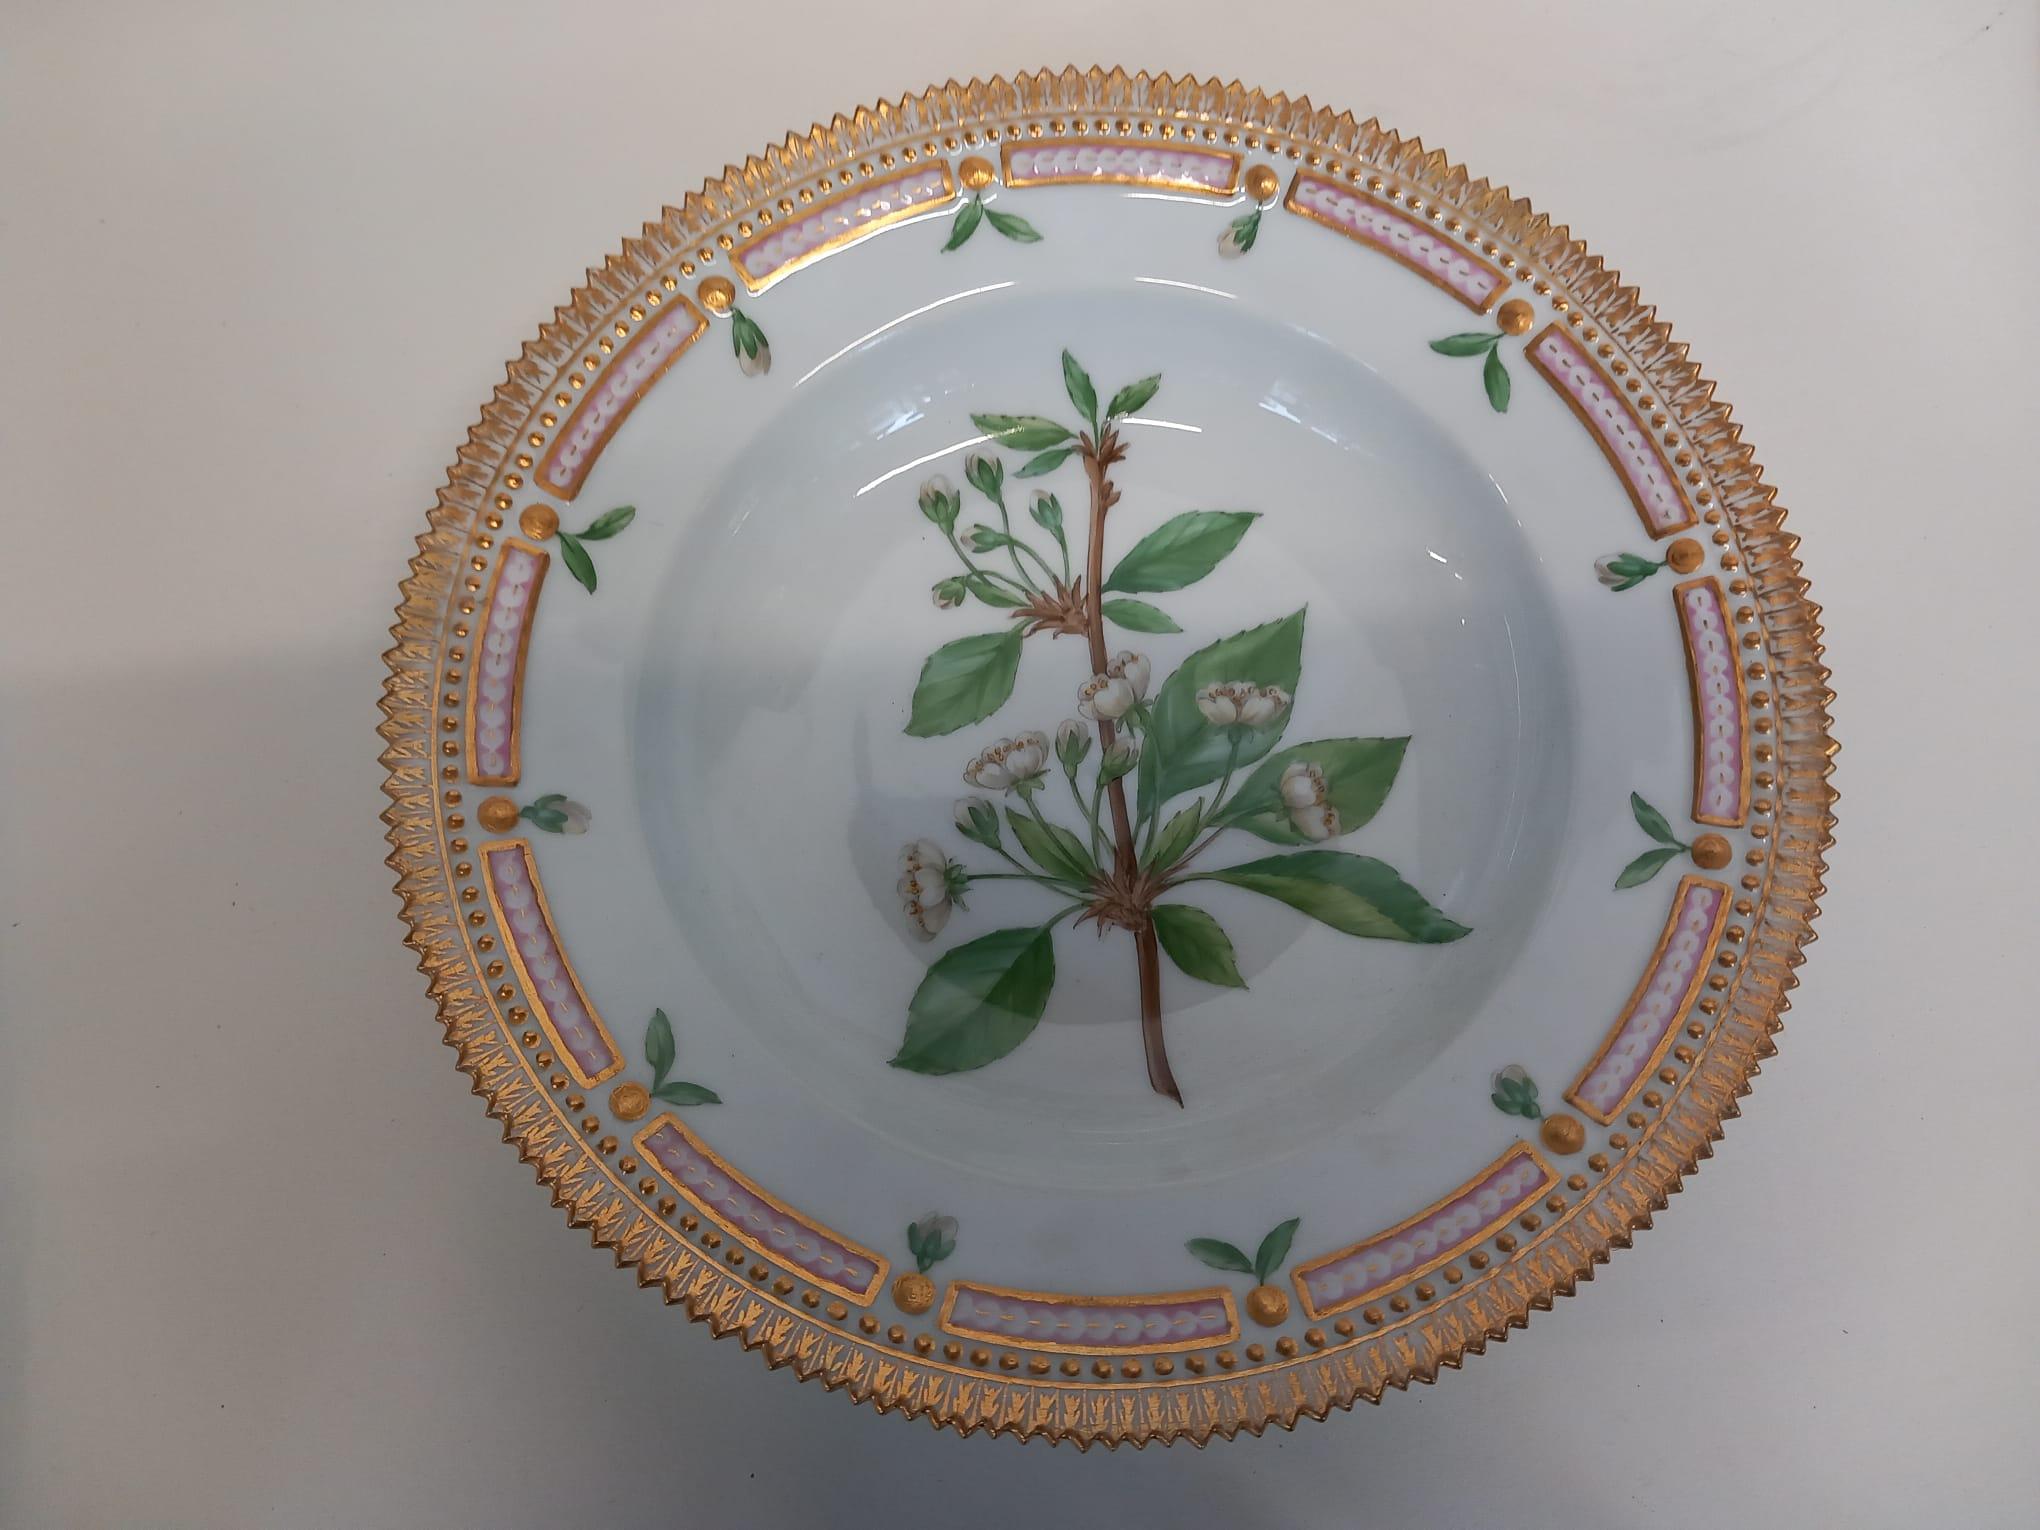 A set of six Flora Danica hand painted plates (4 dinner plates and 2 soup plates) , each one decorated with a different horticultural design, the borders intricately gadrooned in gold leaf with small buds and foliage under the gilded border that